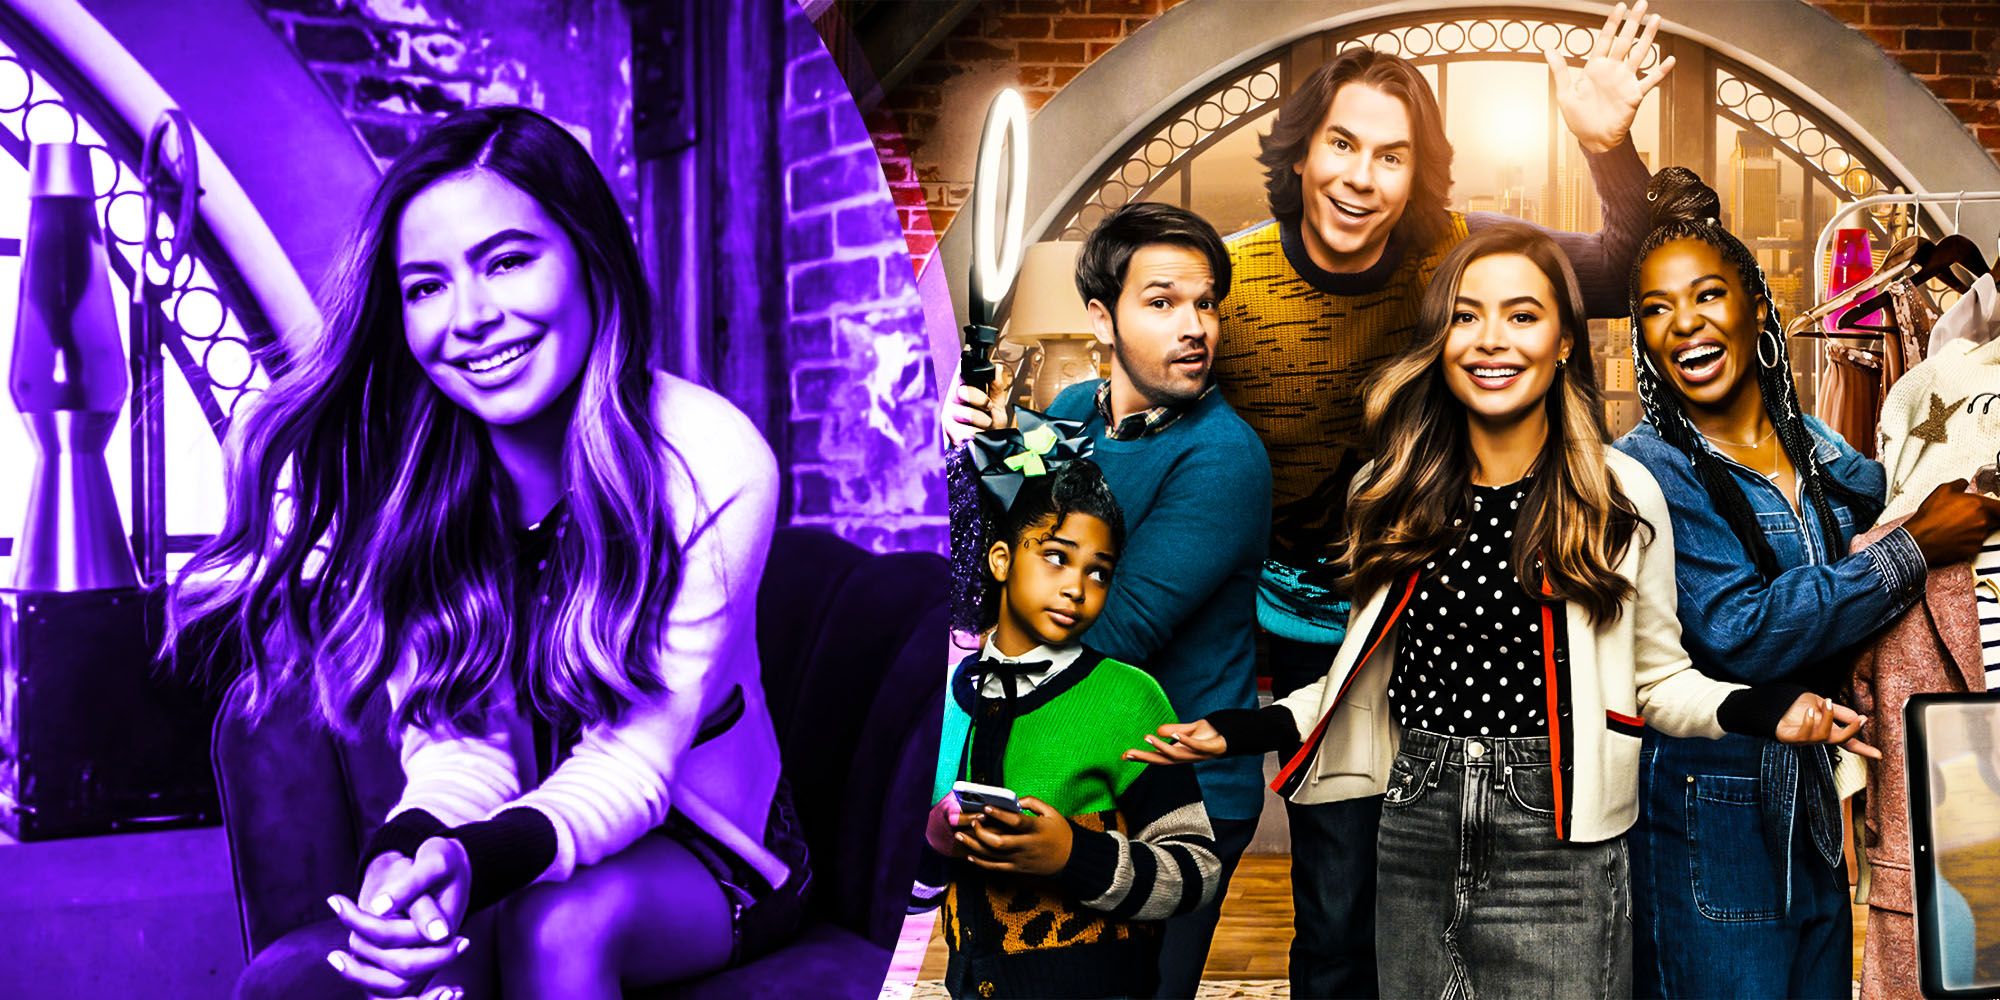 What to expect from Icarly season 2